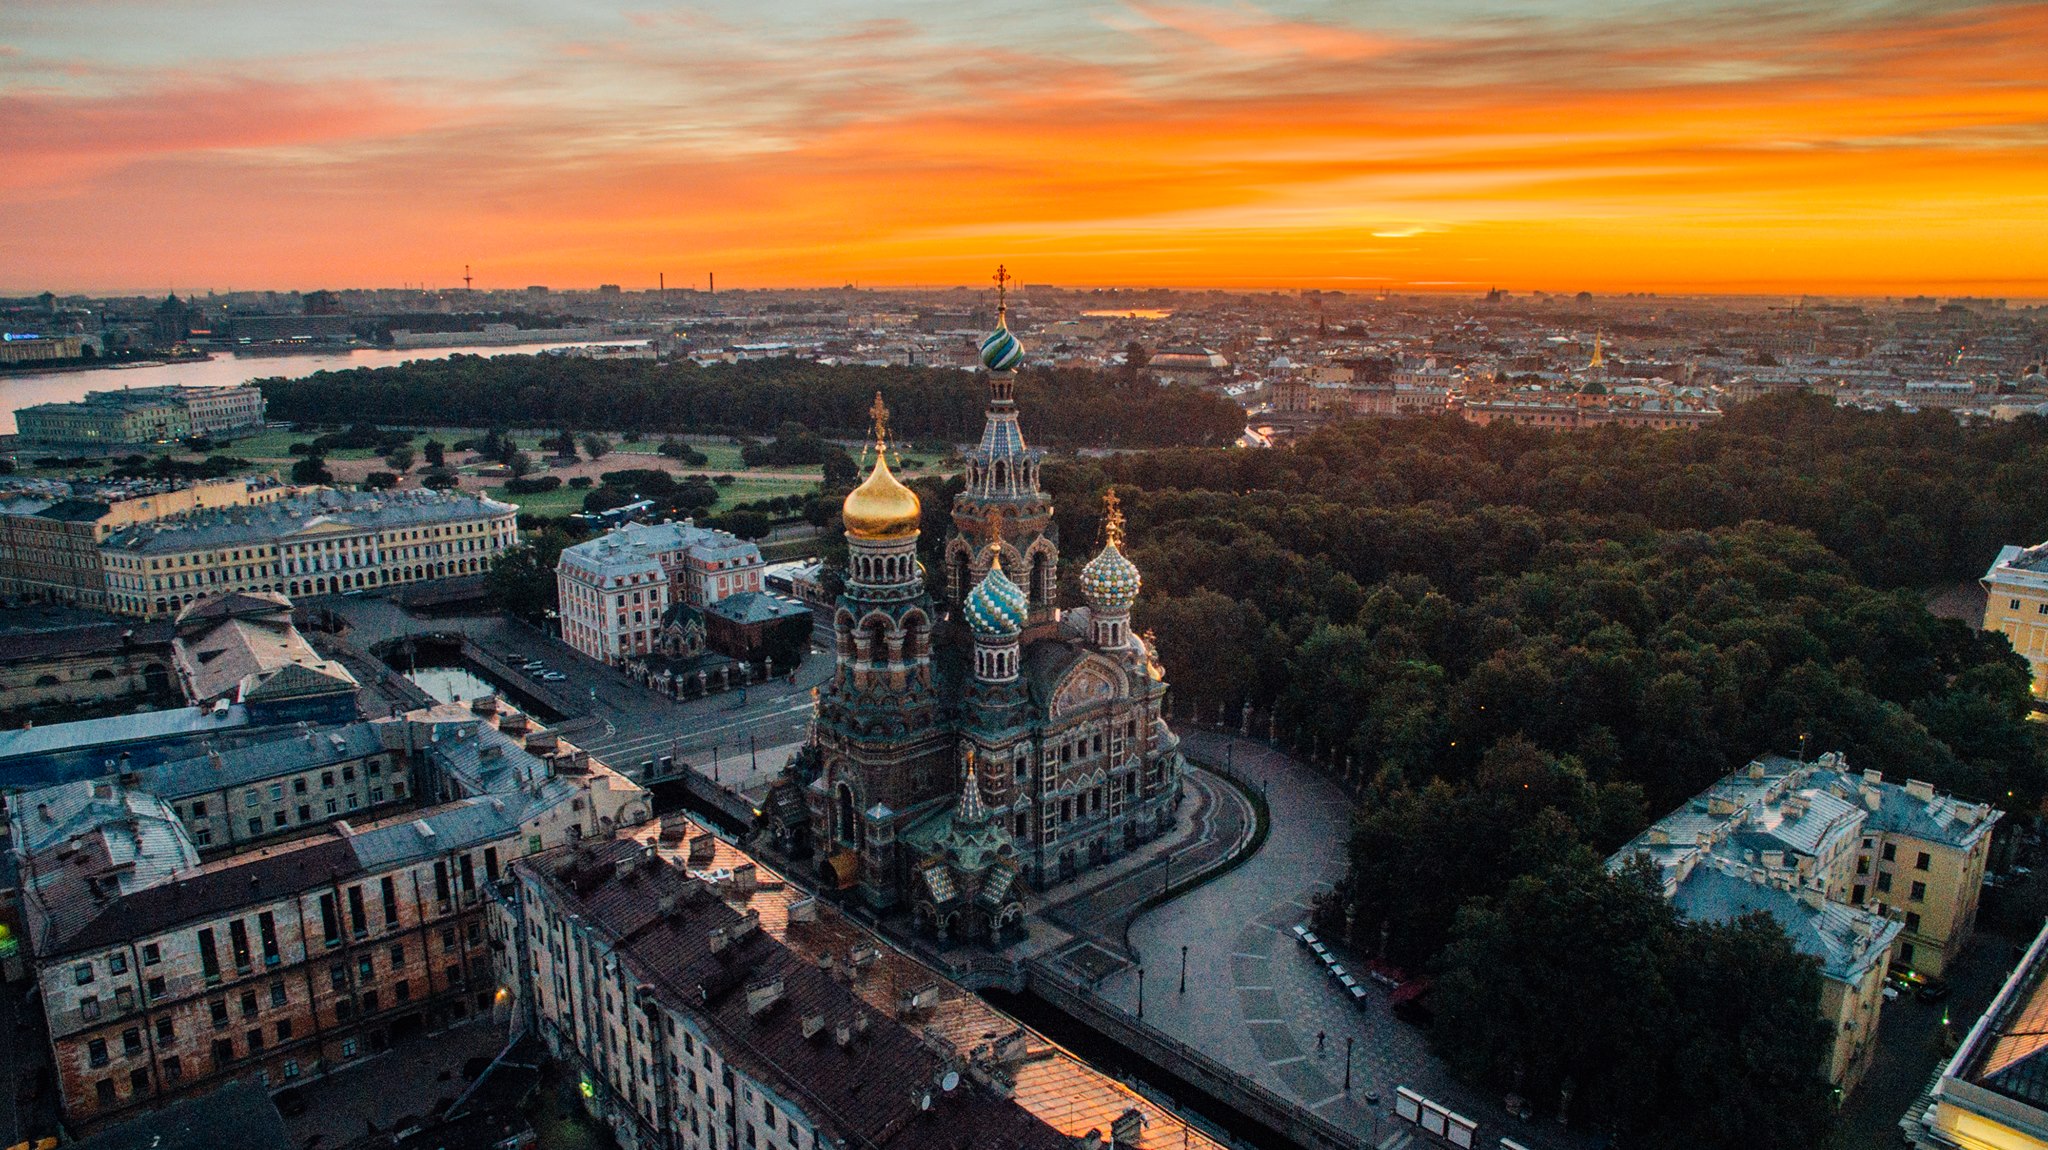 Sunset over St. Petersburg, Russia